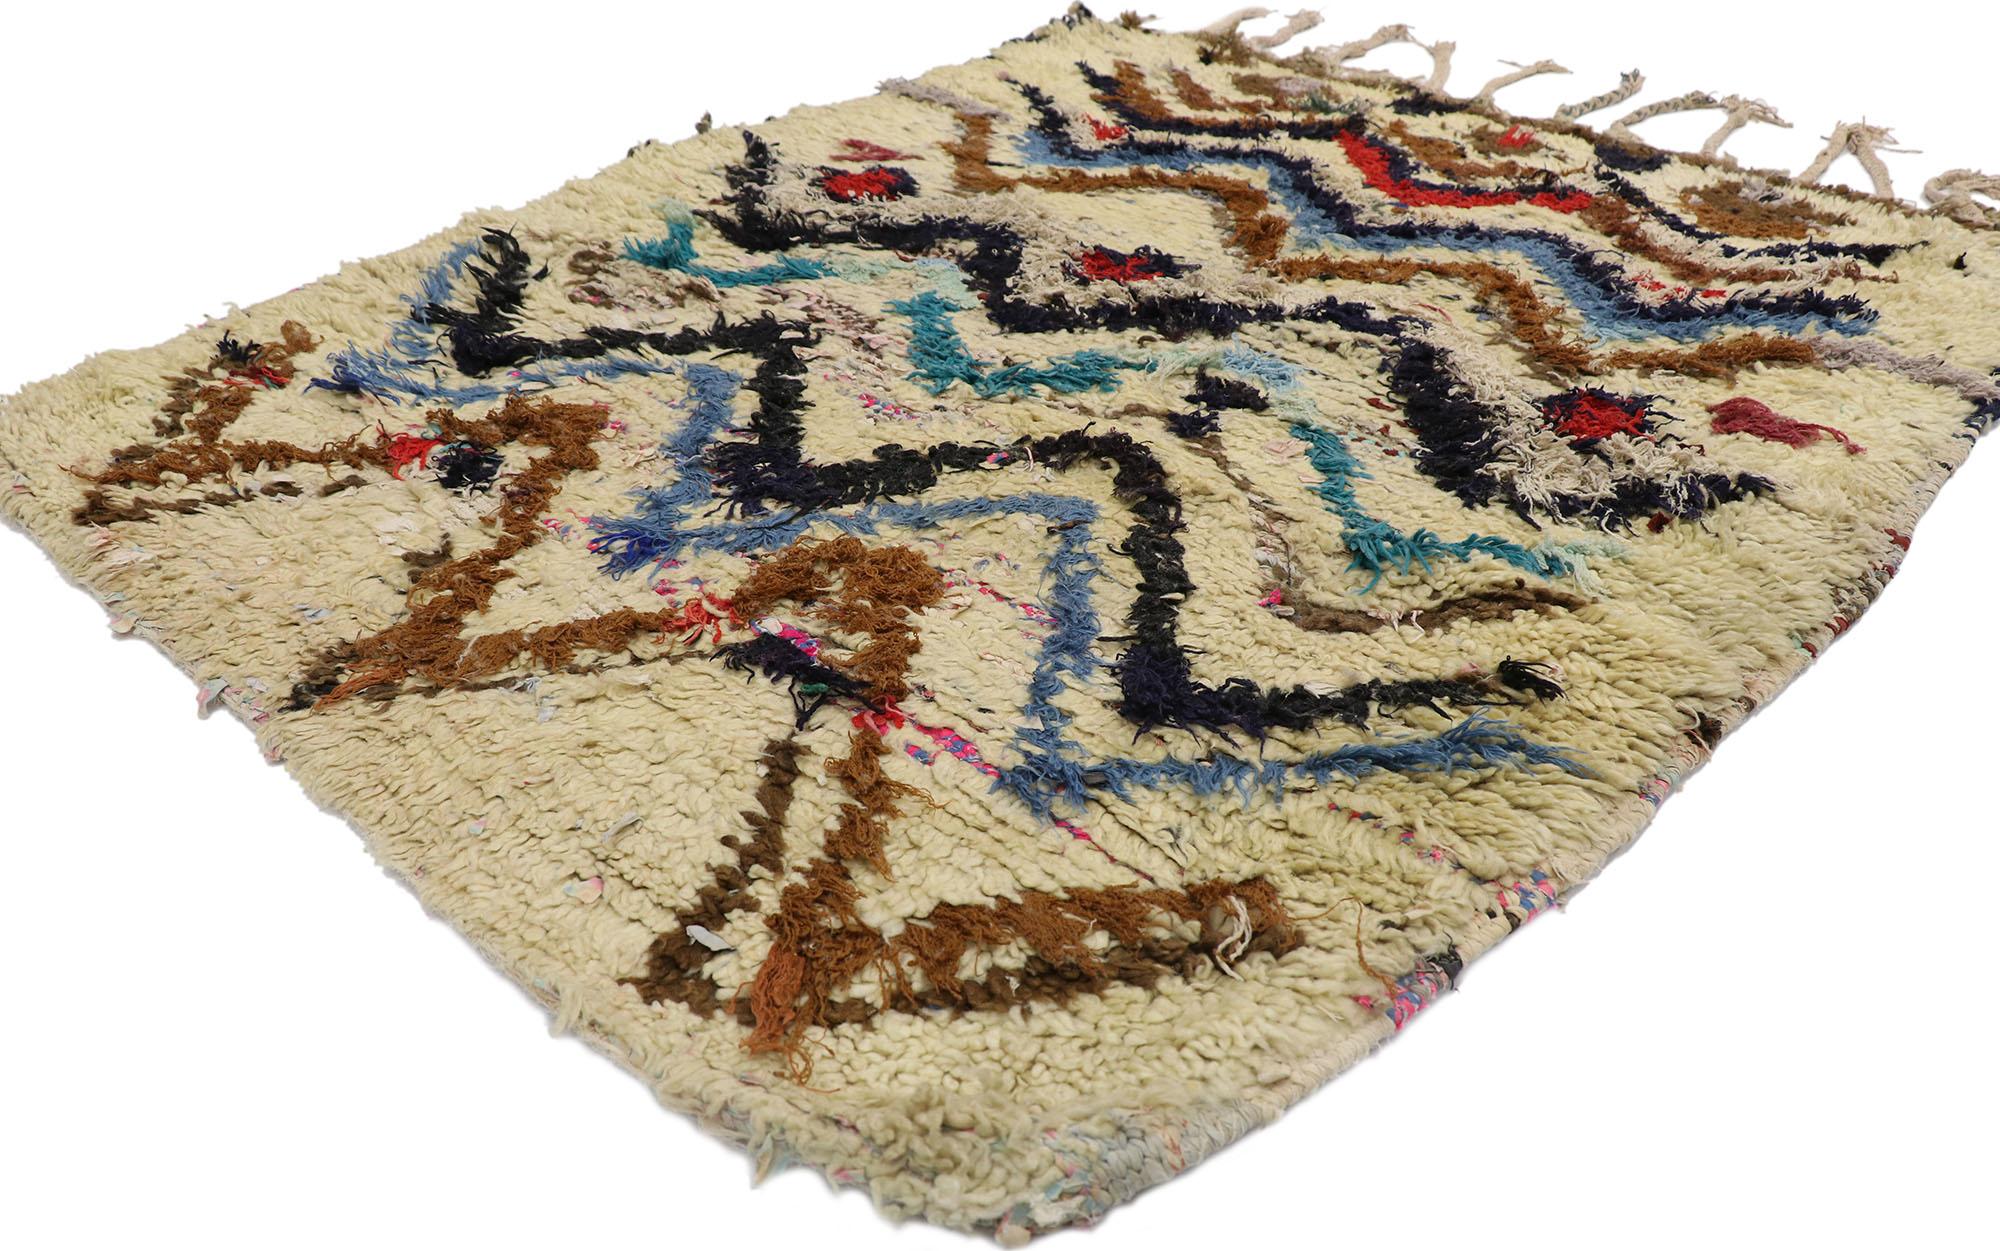 21552 Vintage Boucherouite Moroccan Rag Rug, 04'00 x 04'10. 
Cozy boho meets wabi-sabi in this hand knotted vintage Boucherouite Moroccan rag rug. The intrinsic chevron design and earthy hues woven into this piece work together creating a warm and